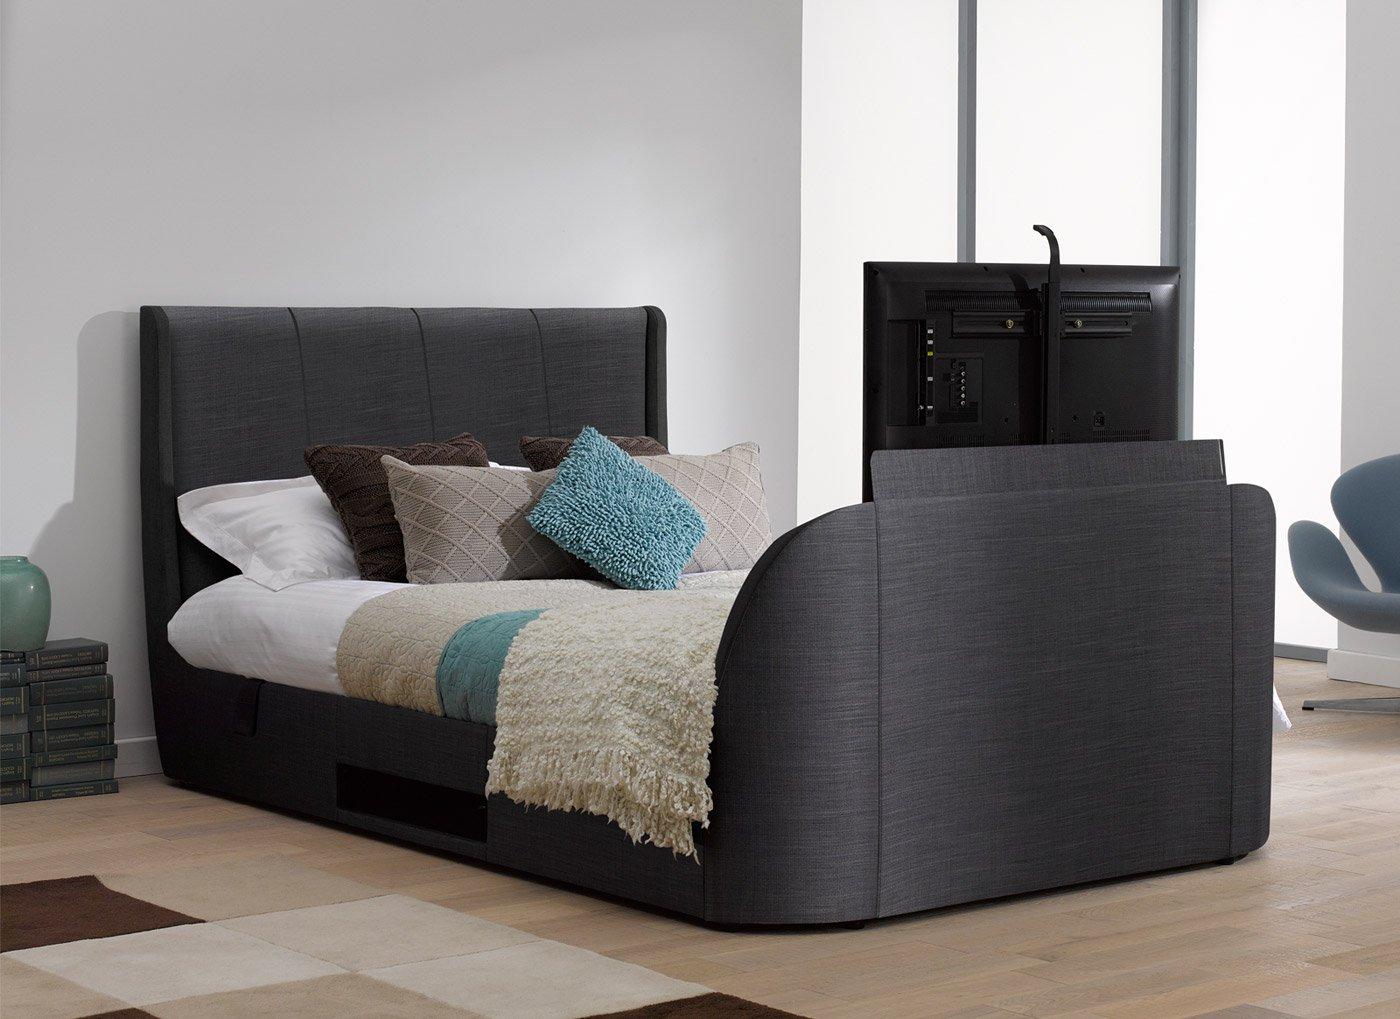 Fabric tv bed